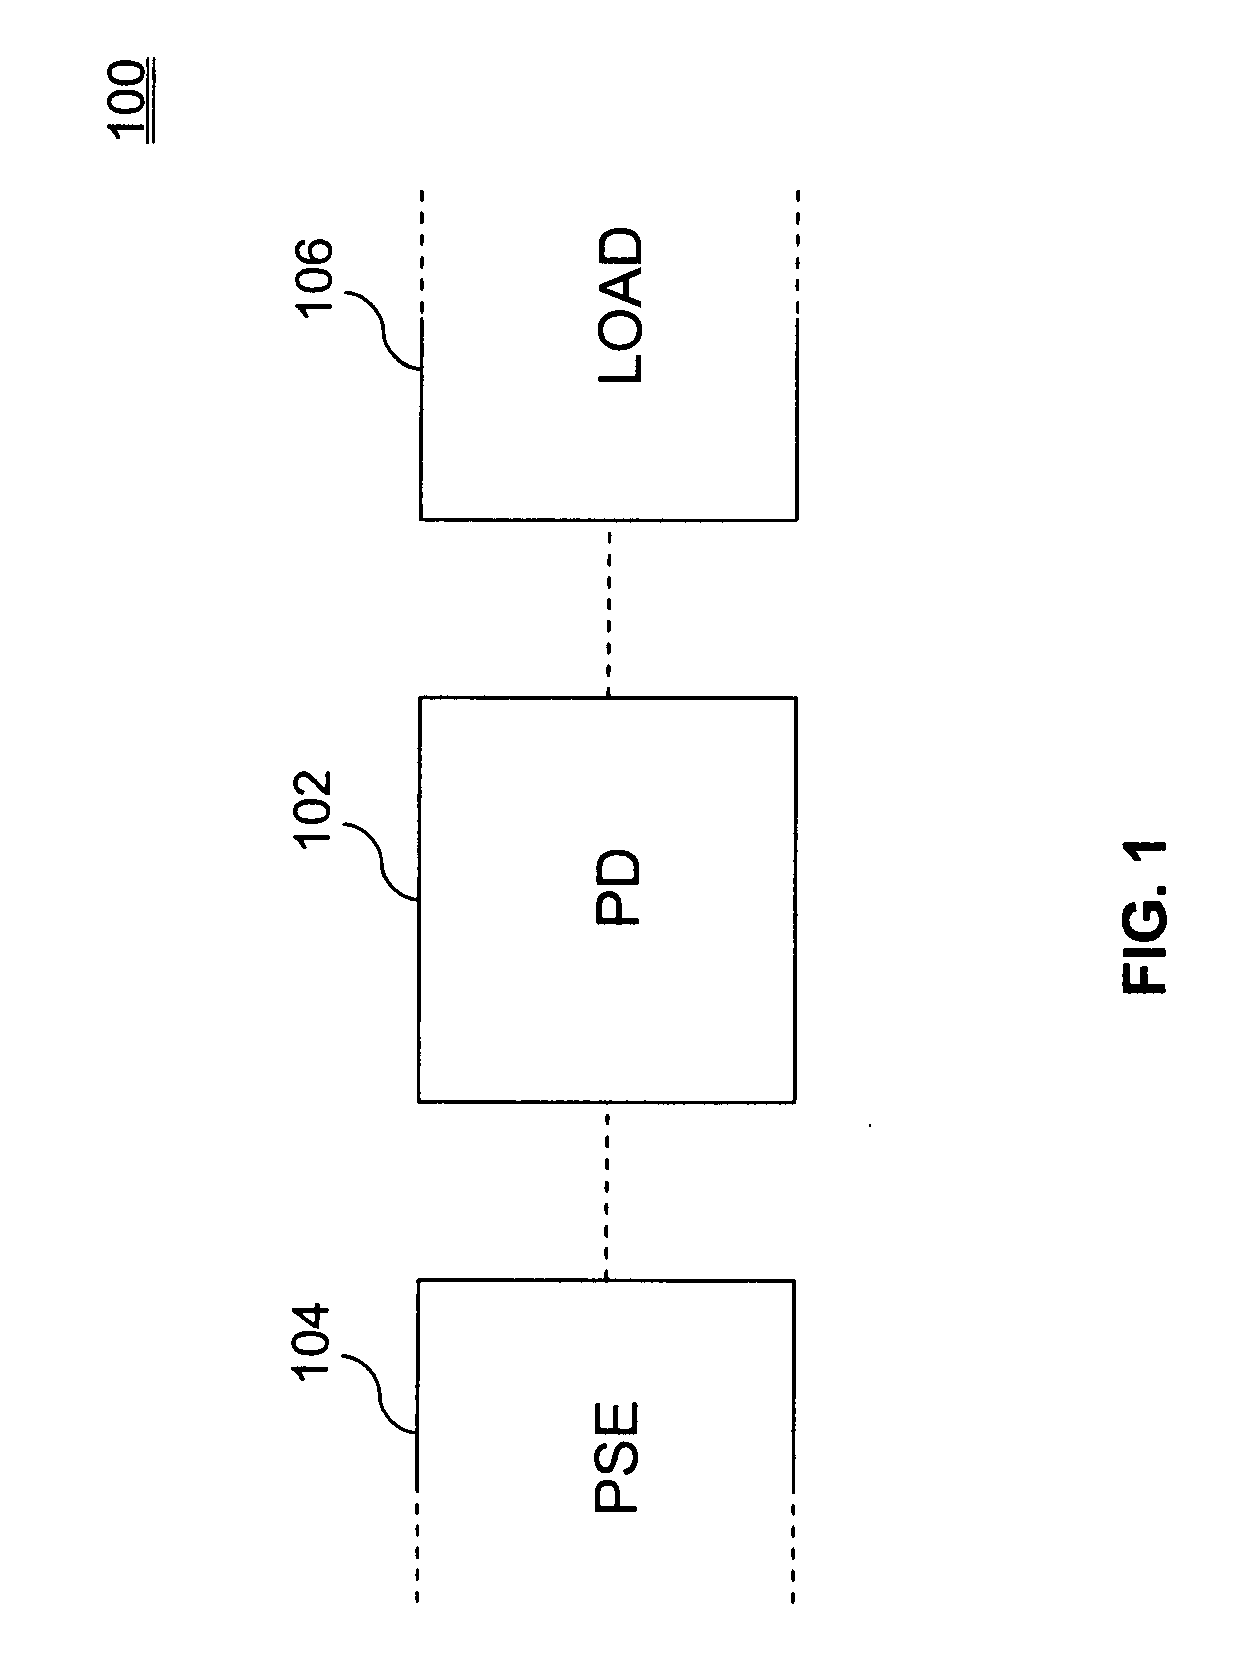 Powered device analysis and power control in a Power-over-Ethernet system